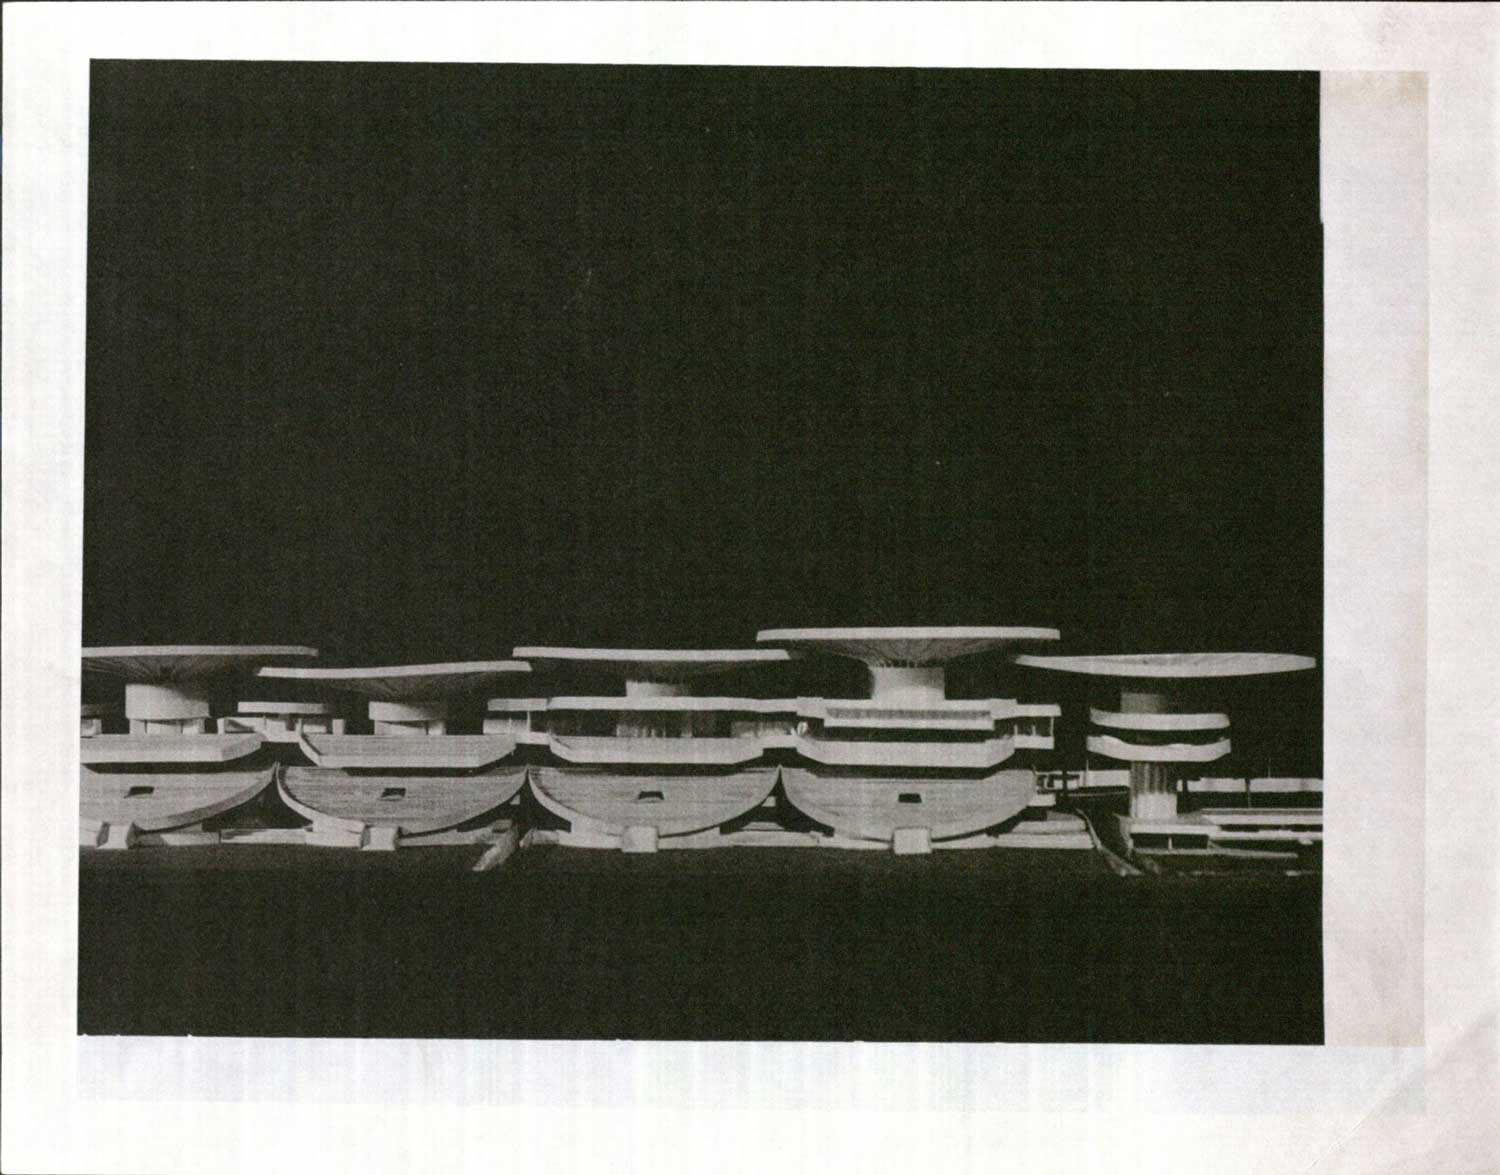 Image of an architectural model, showcasing the Race Course's umbrella structures.